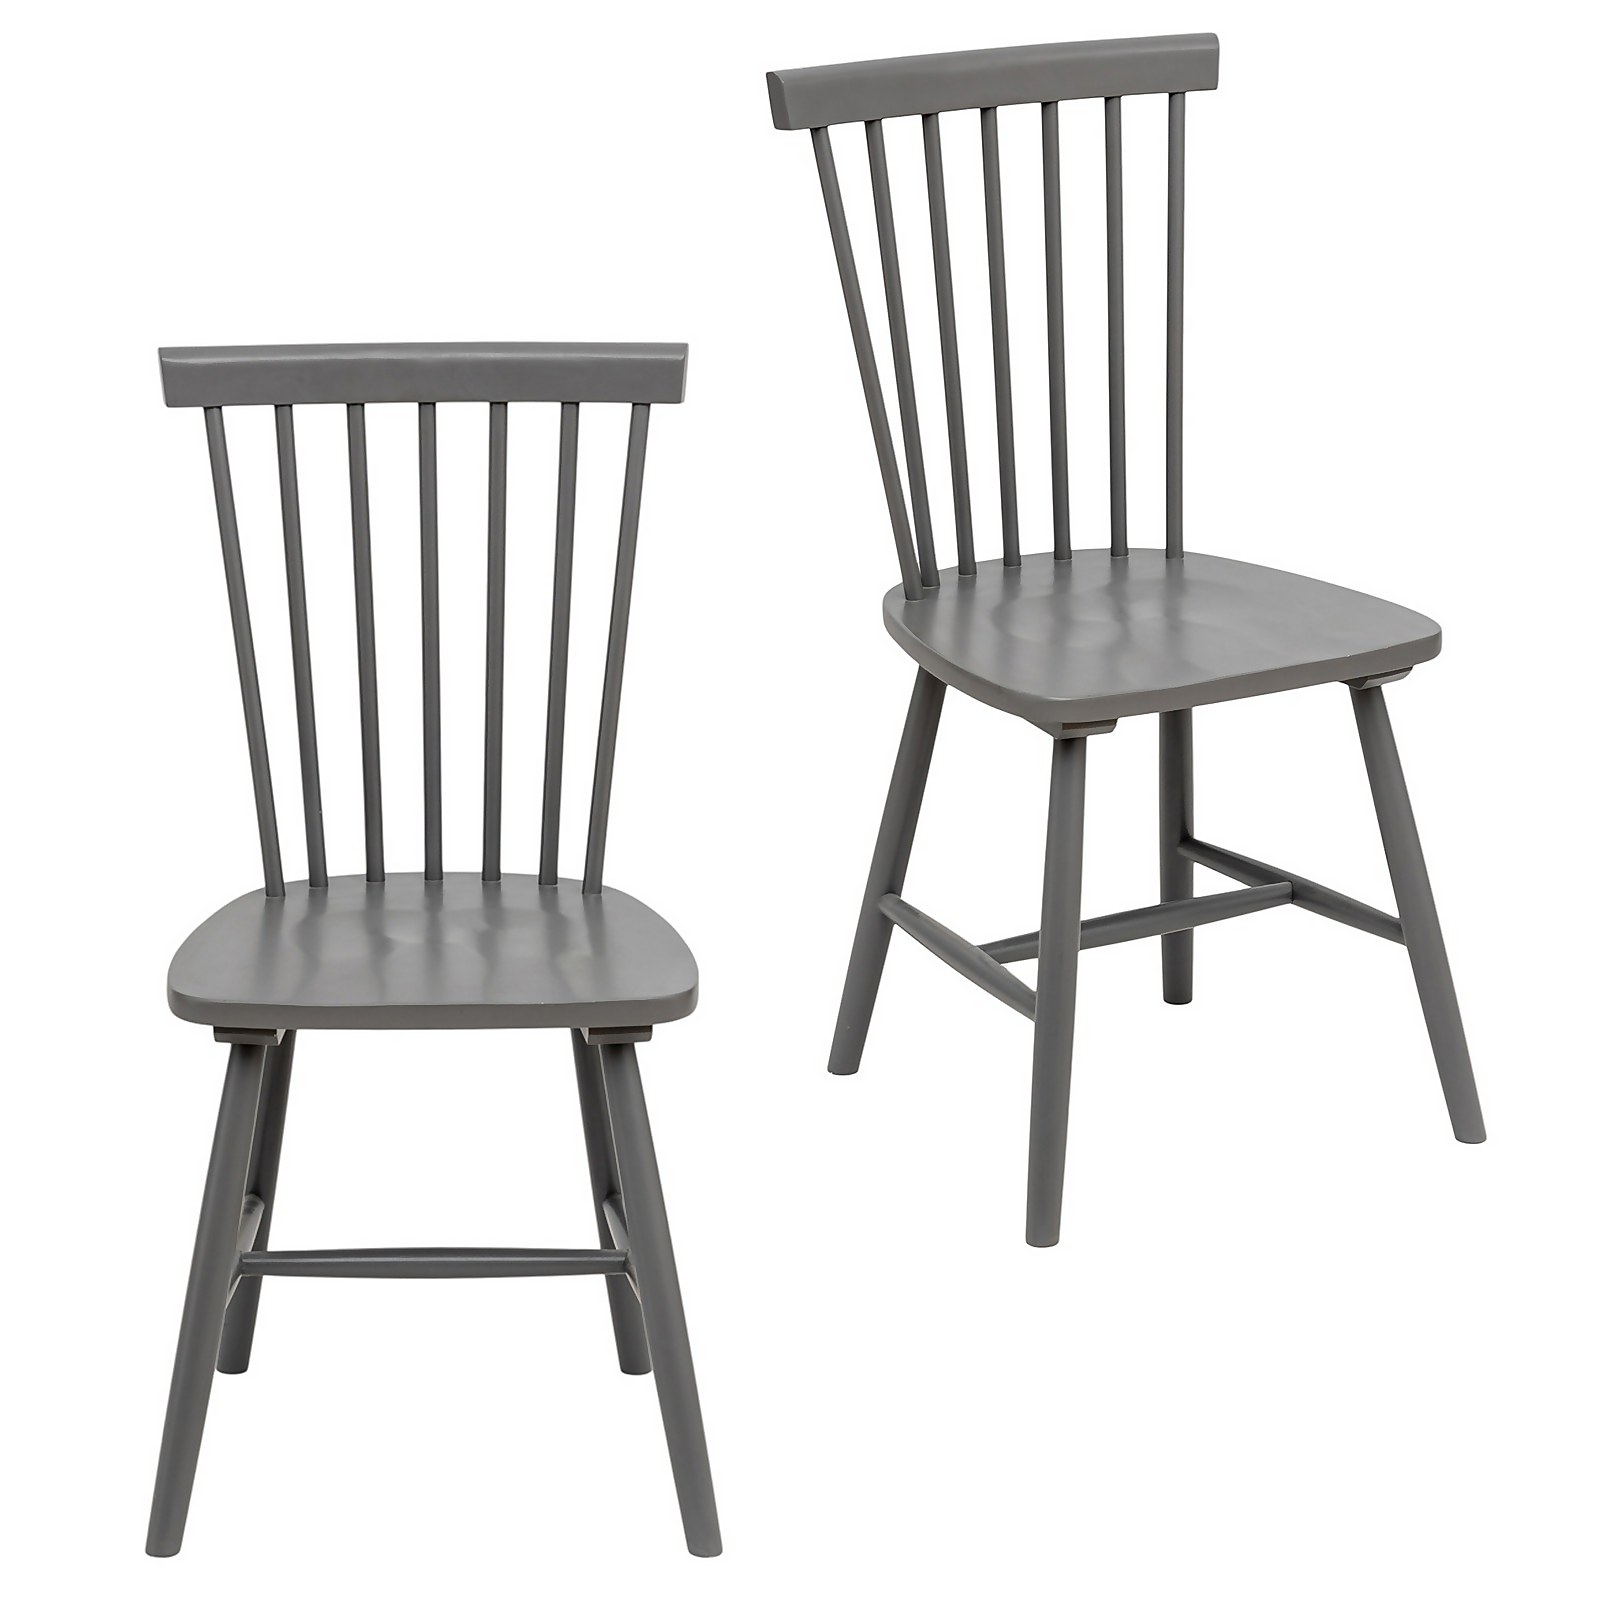 Photo of The Spindle Chair - Set Of 2 - Charcoal